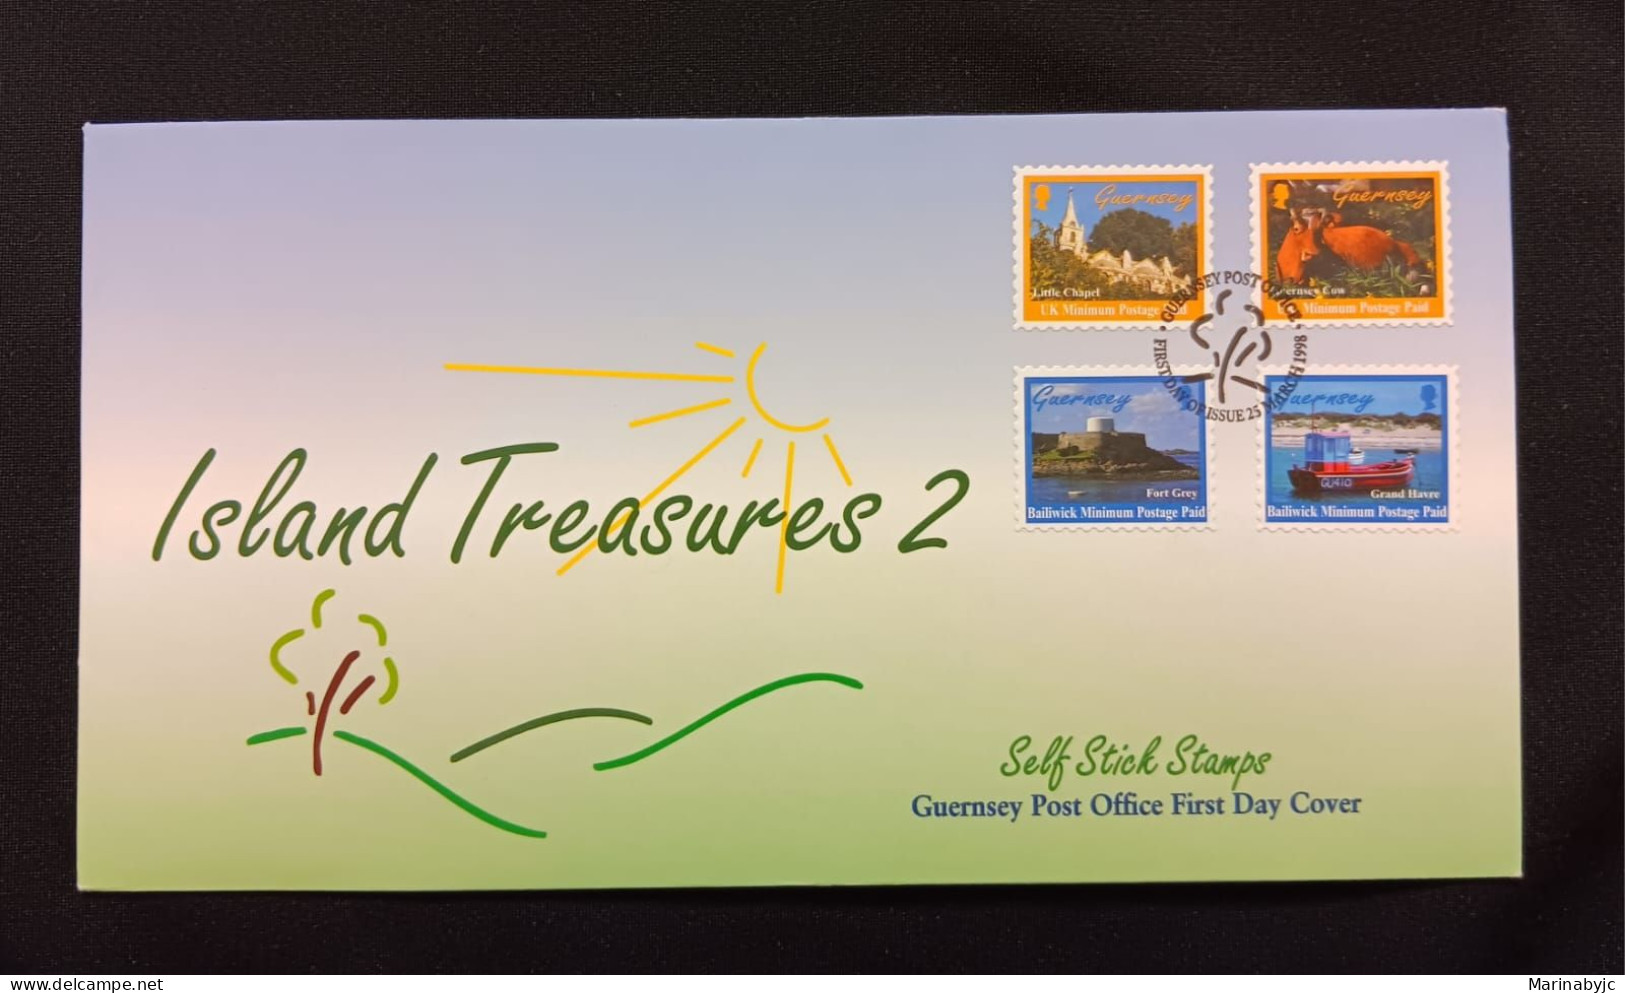 DM)1998, GUERNSEY, FIRST DAY COVER, ISSUE, TREASURE OF THE ISLAND 2, TOURISM, STICKERS, ENCRYPTIONS, LITTLE CHAPEL, COW, - Guernsey